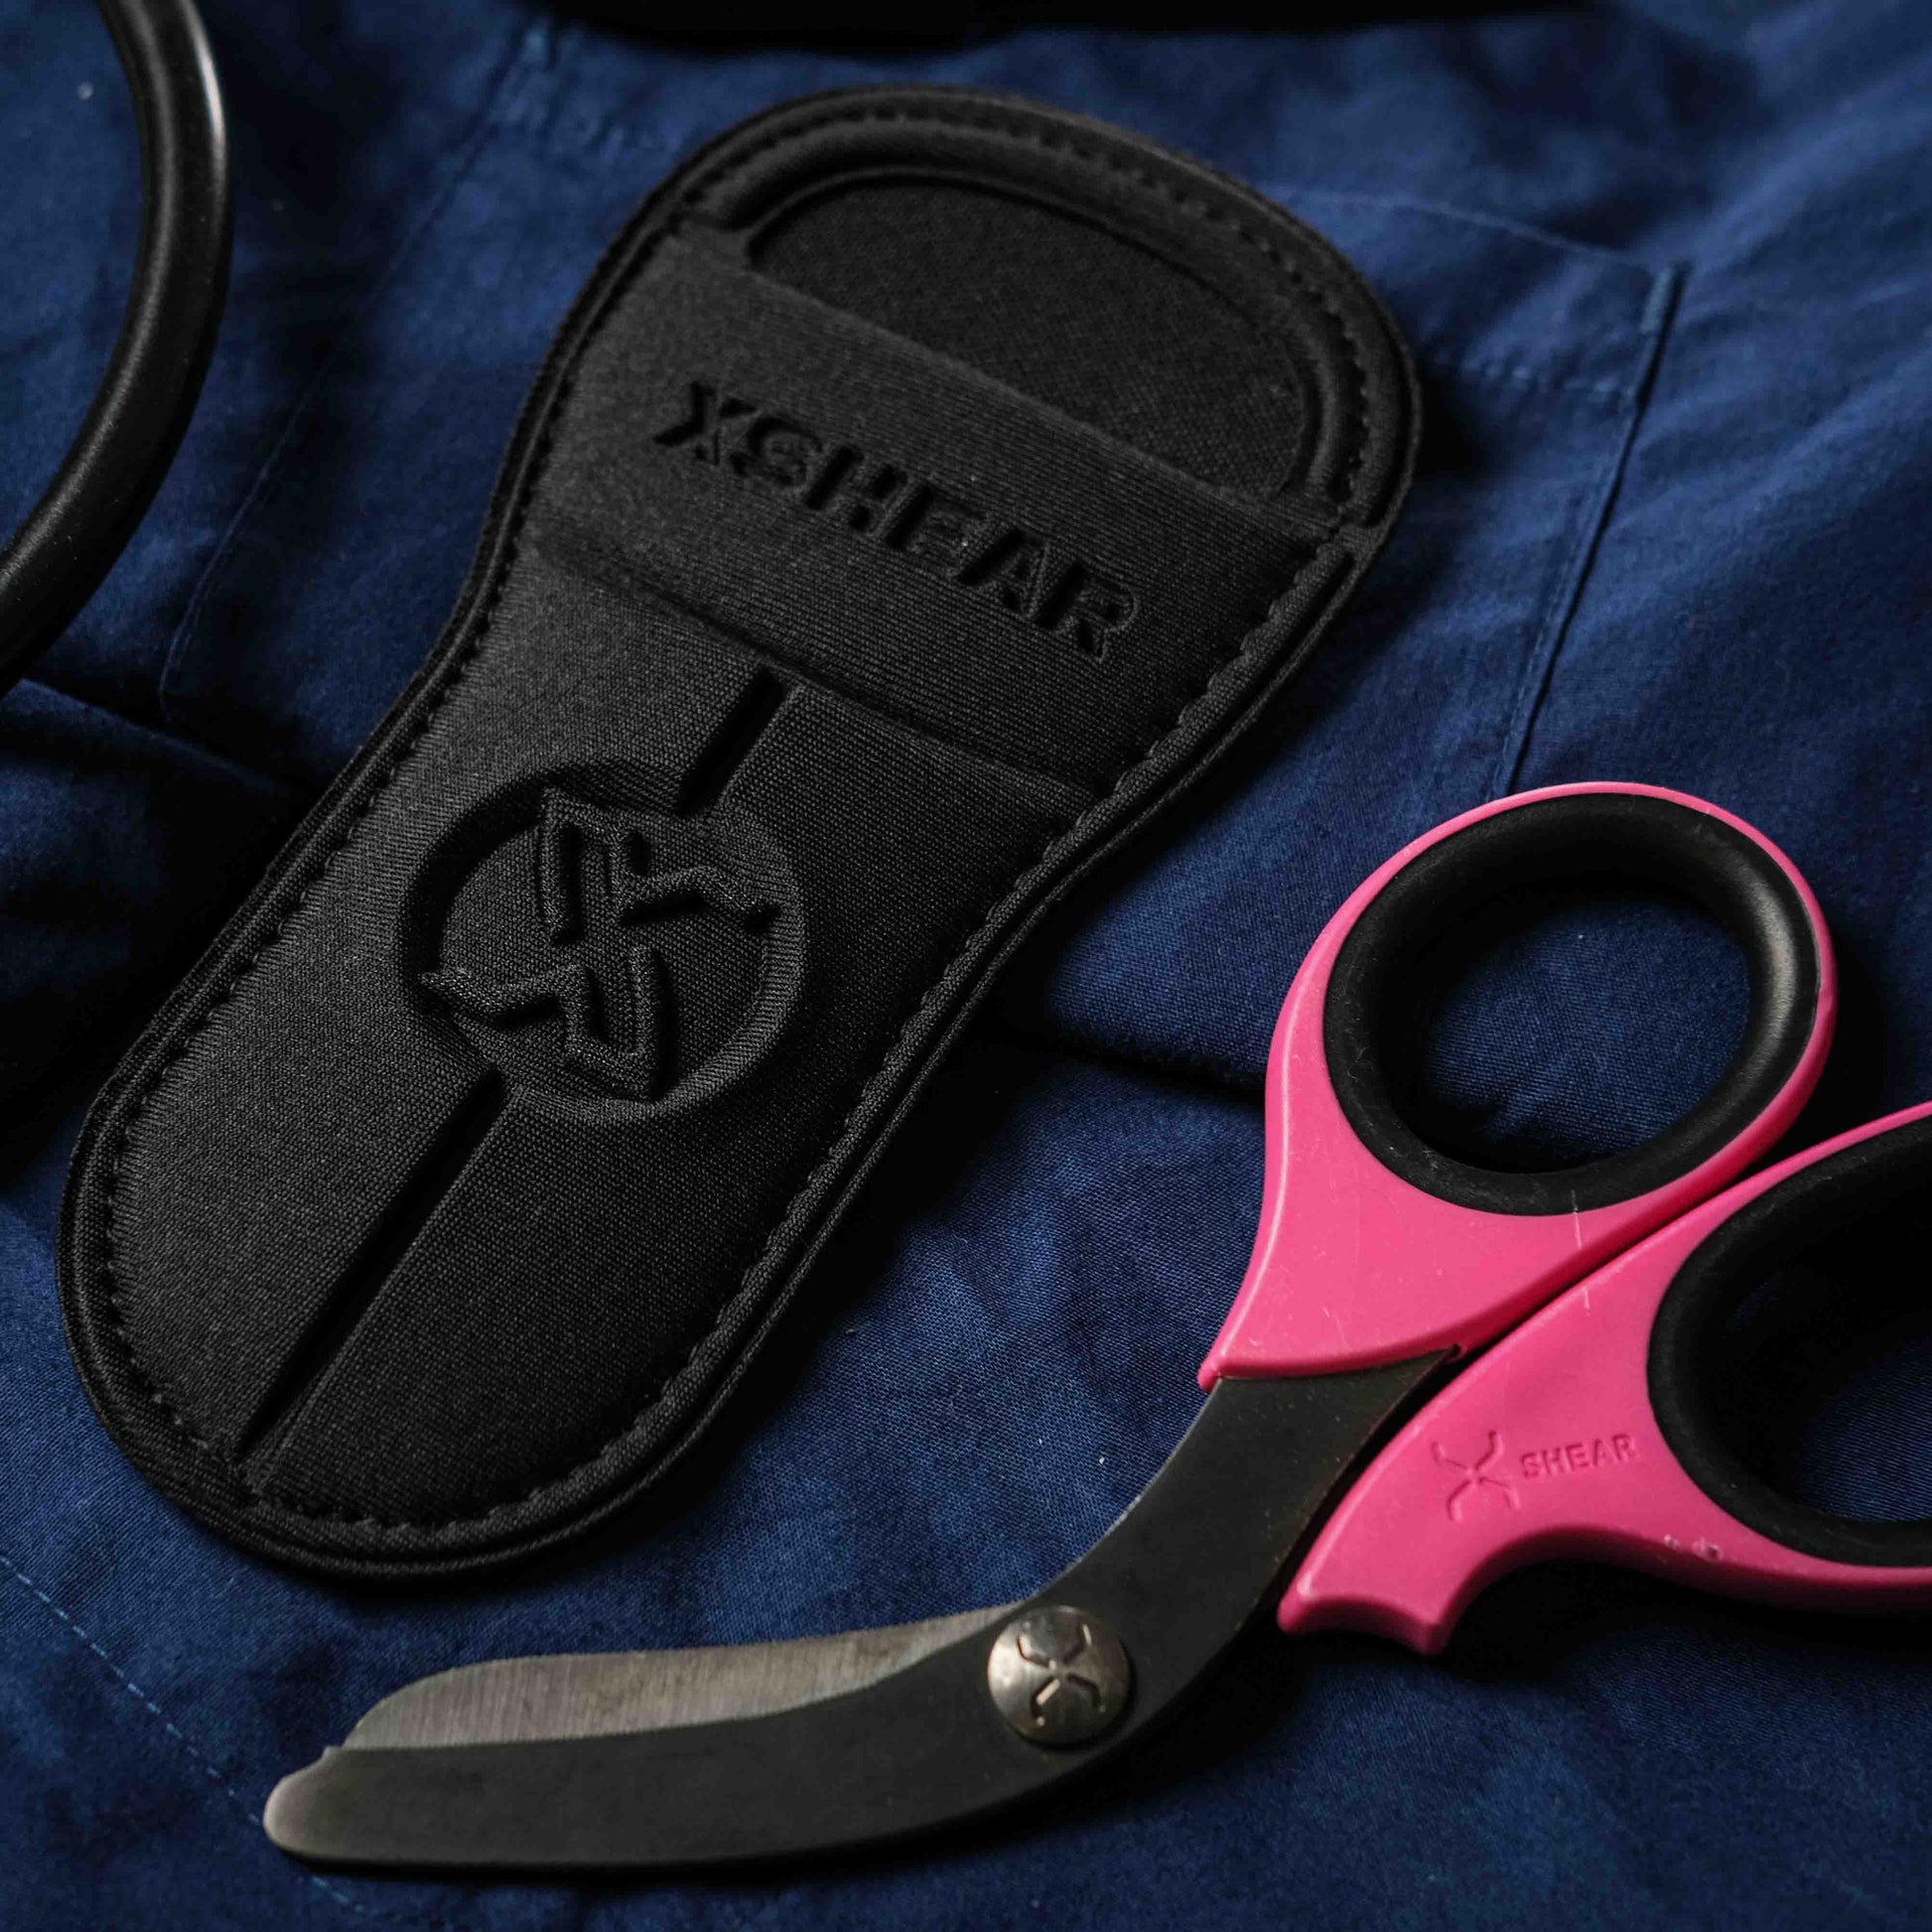 Chief Miller Shears XShear 7.5” Heavy Duty Trauma Shears. Pink & Black Handles, Black Titanium Coated Stainless Steel Blades, For the Professional Emergency Provider Apparel